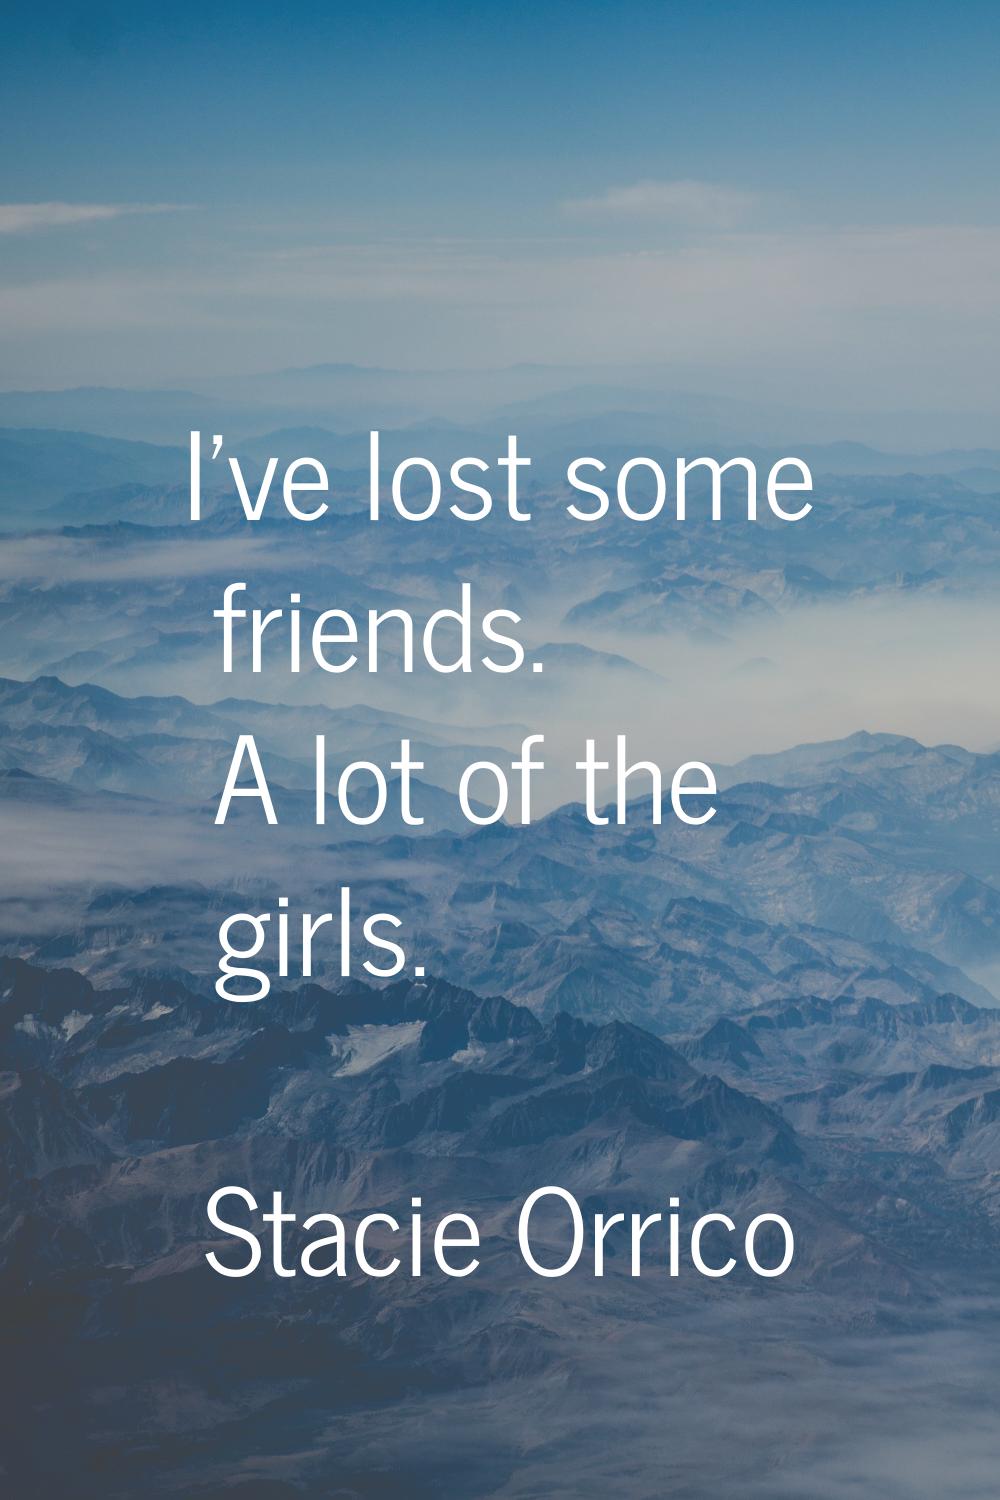 I've lost some friends. A lot of the girls.